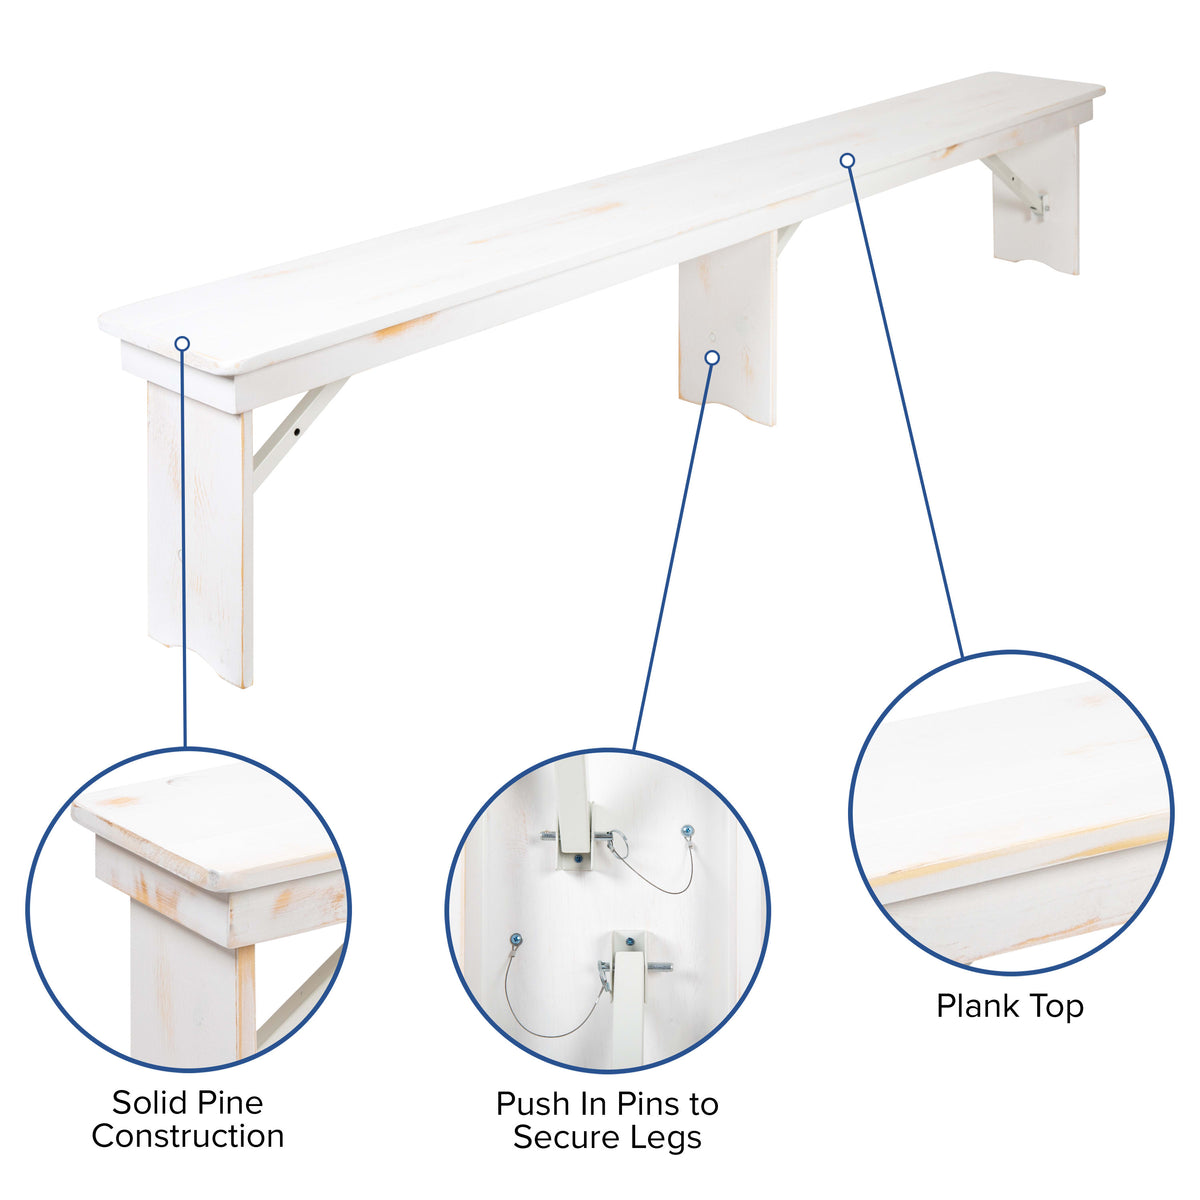 Antique Rustic White |#| 5 Piece Set-9' x 40inch Antique Rustic White Folding Farm Table and Four Bench Set